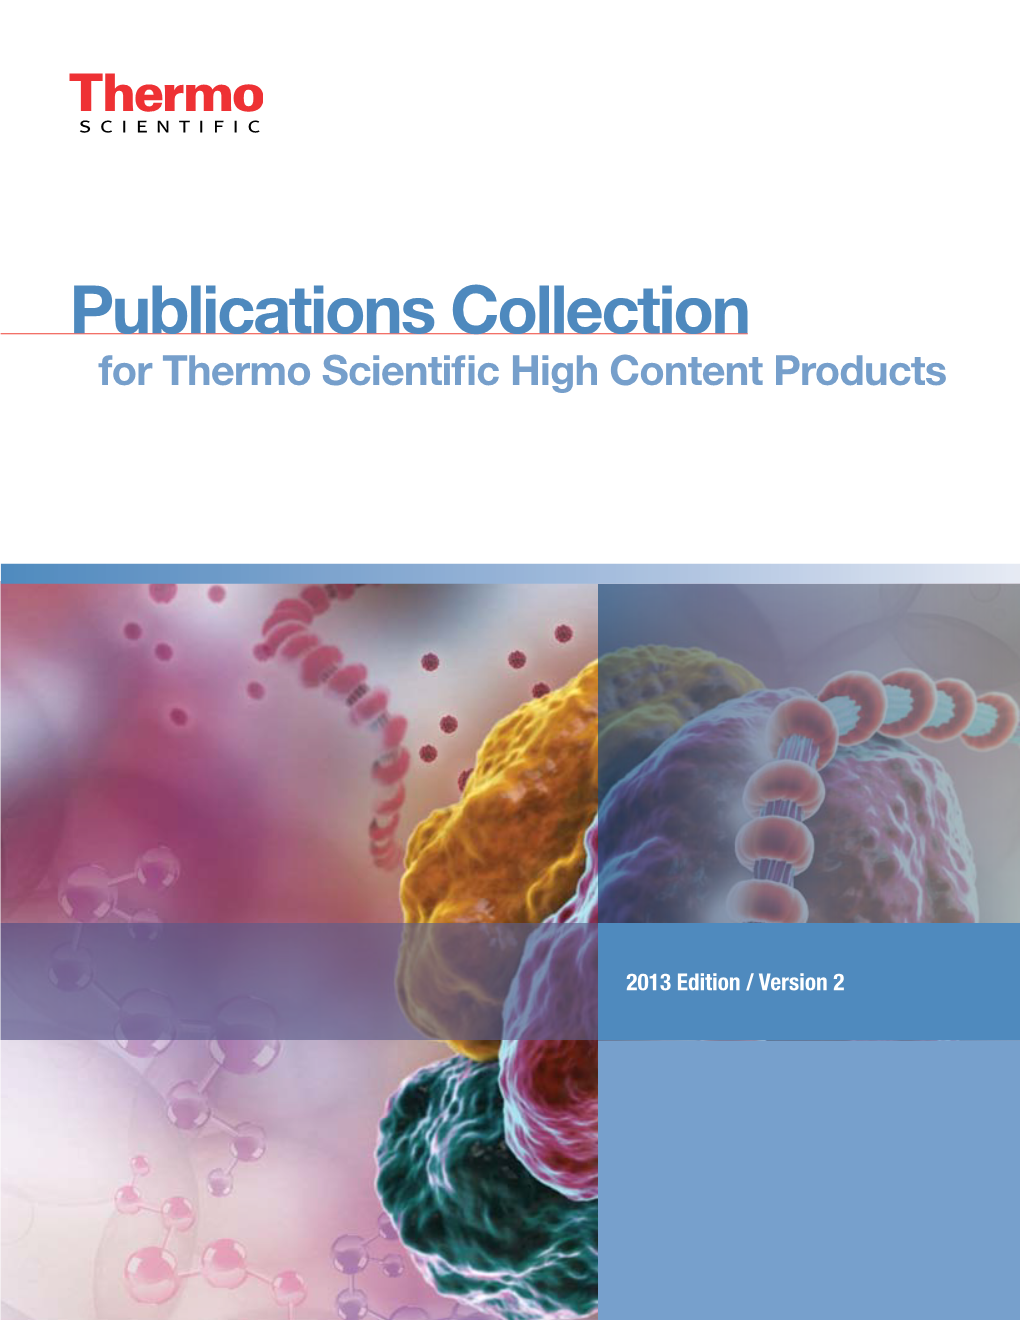 Publications Collection for Thermo Scientific High Content Products